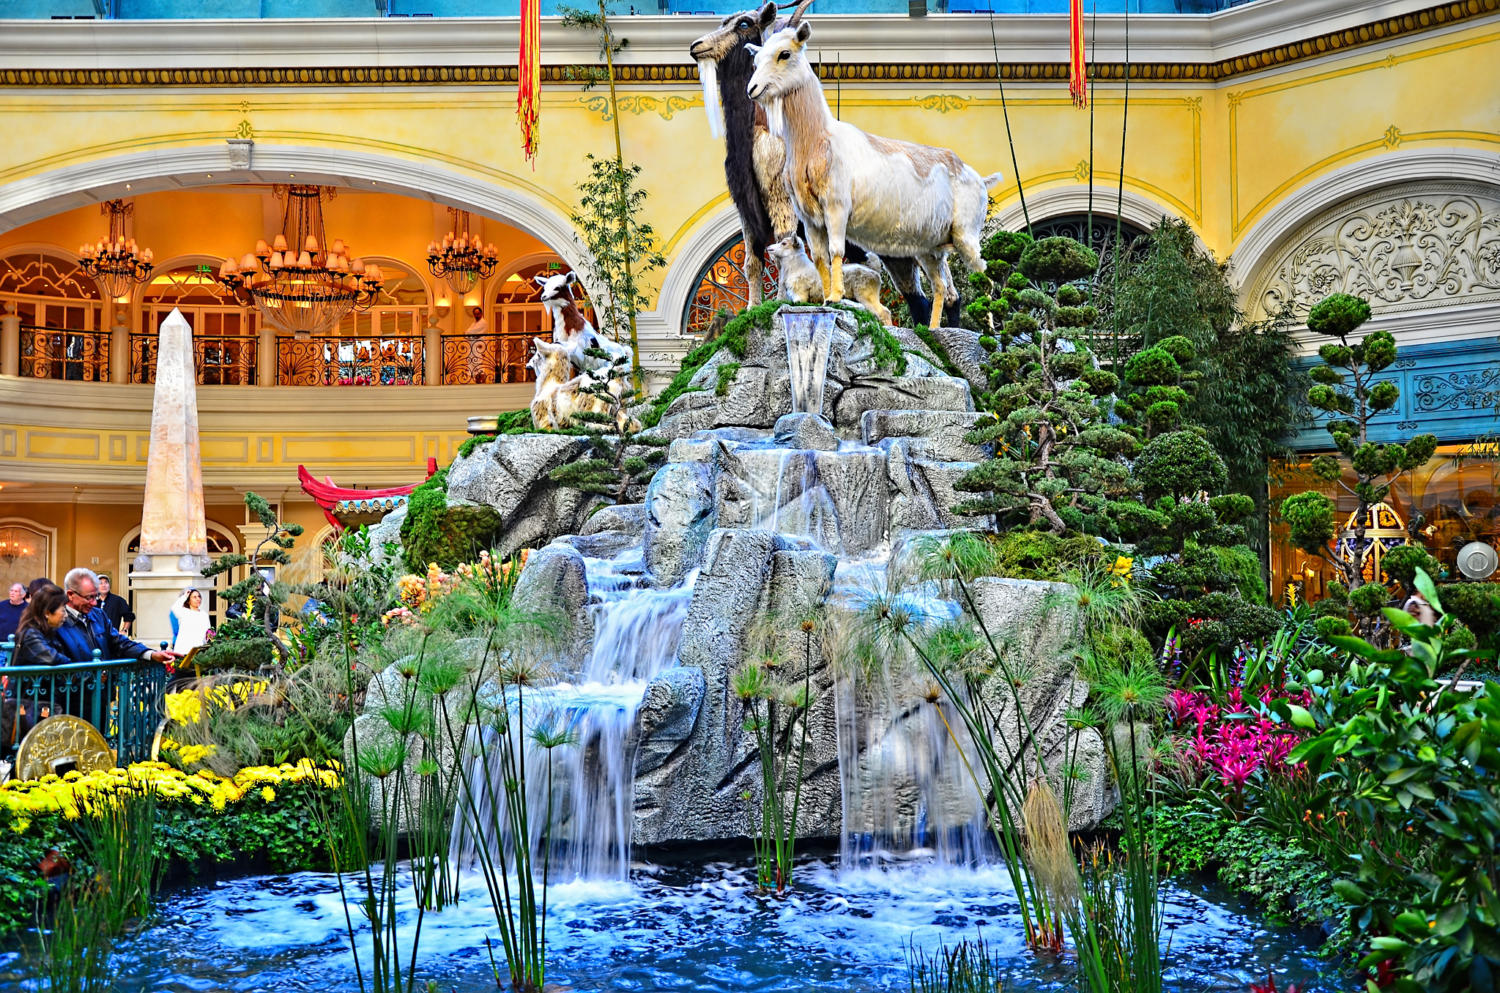 Bellagio_Conservatory_and_Botanical_Gardens_-_Las_Vegas_Year_of_the_Goat_16296643105